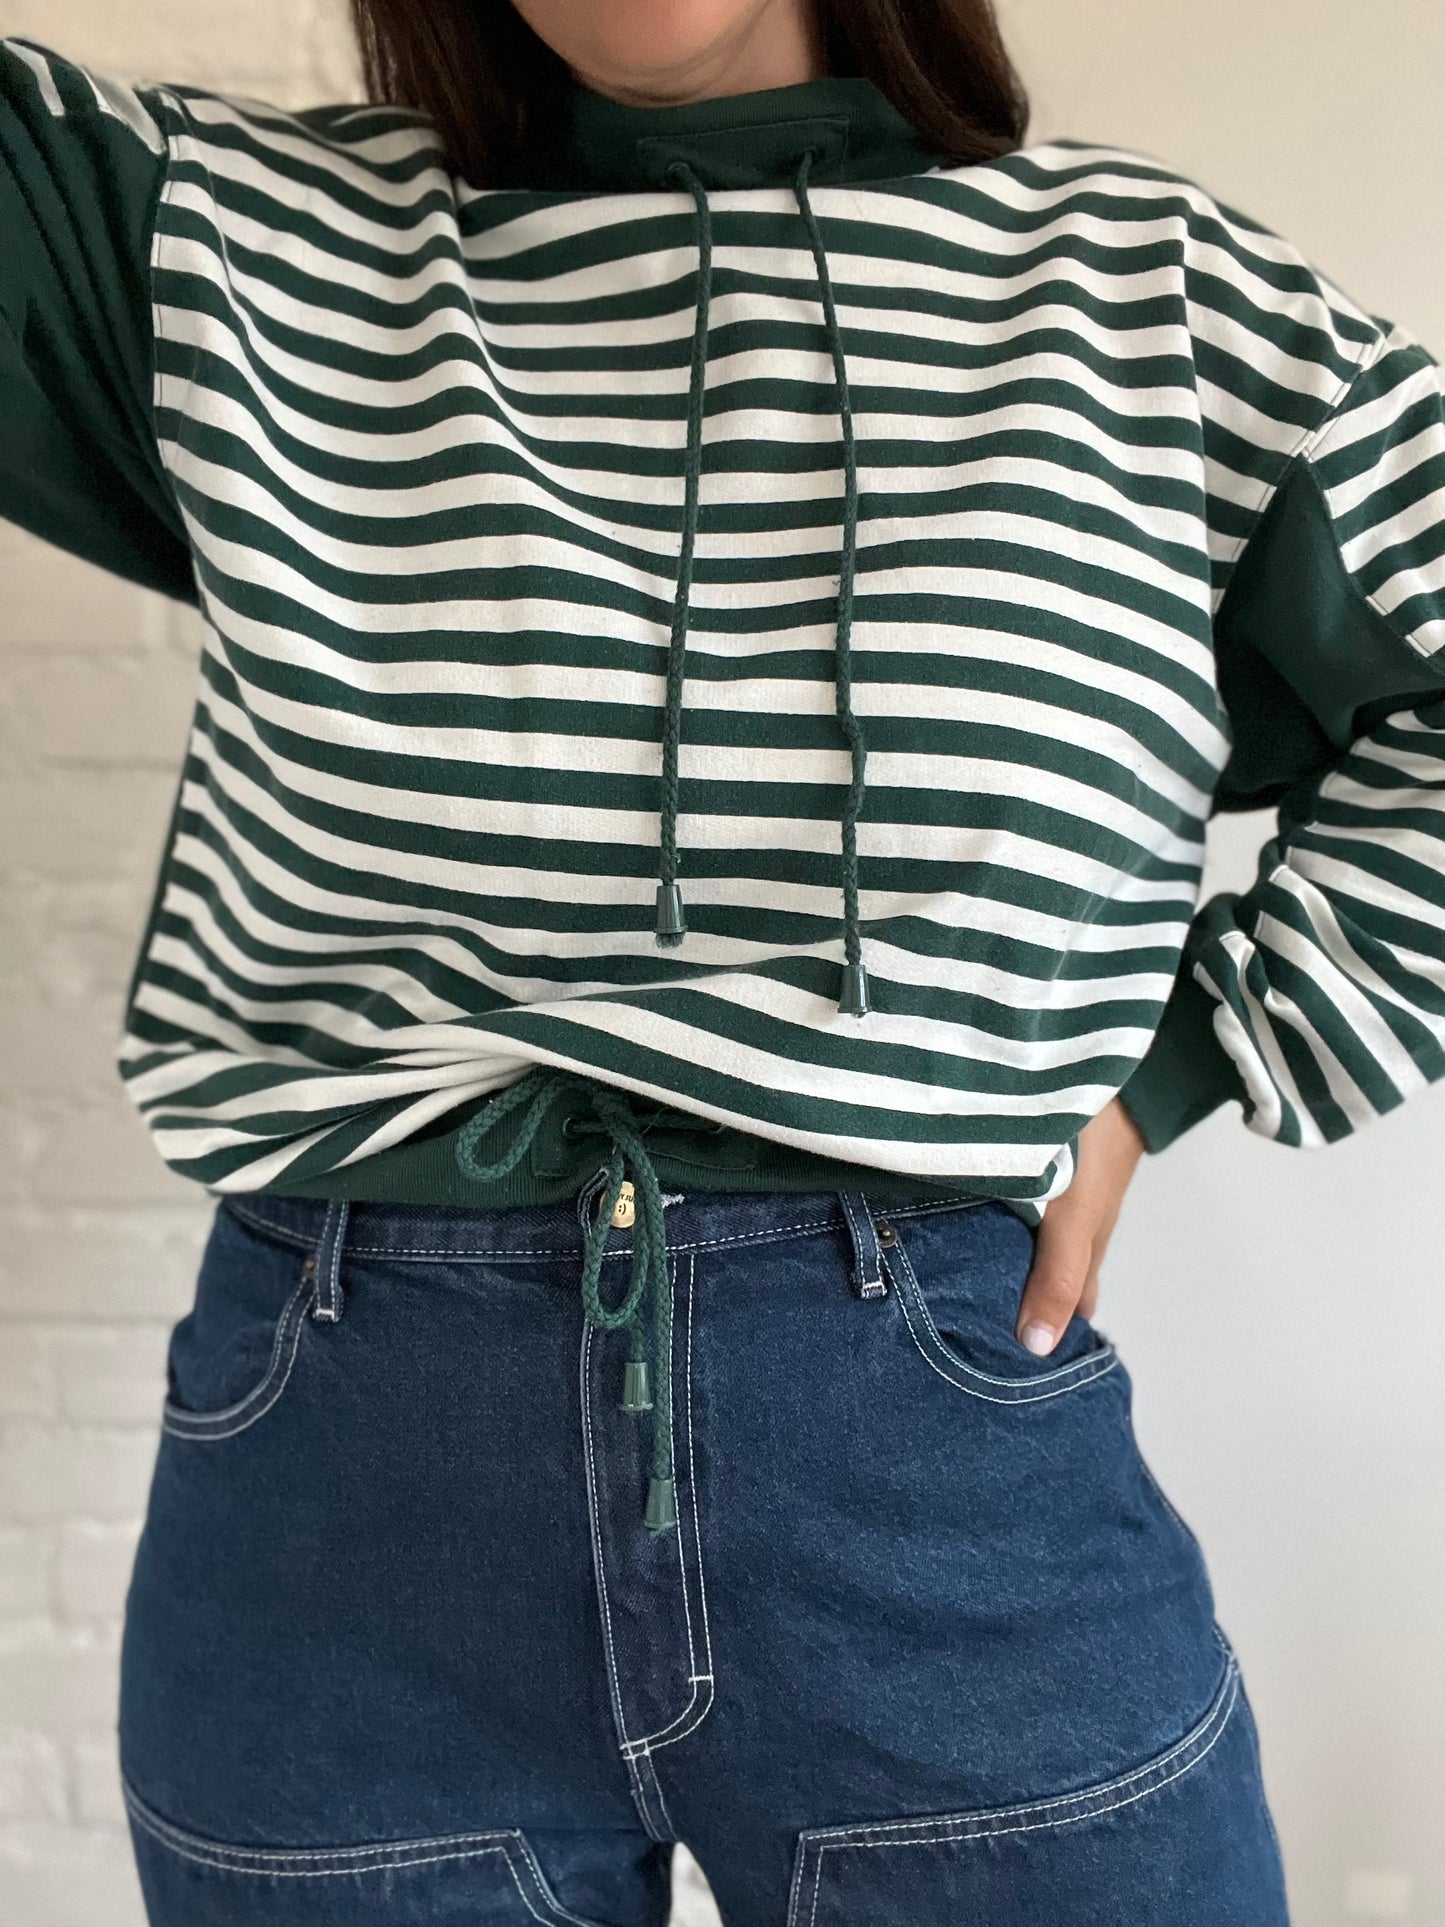 Striped Rugby Style Sweater - Size L